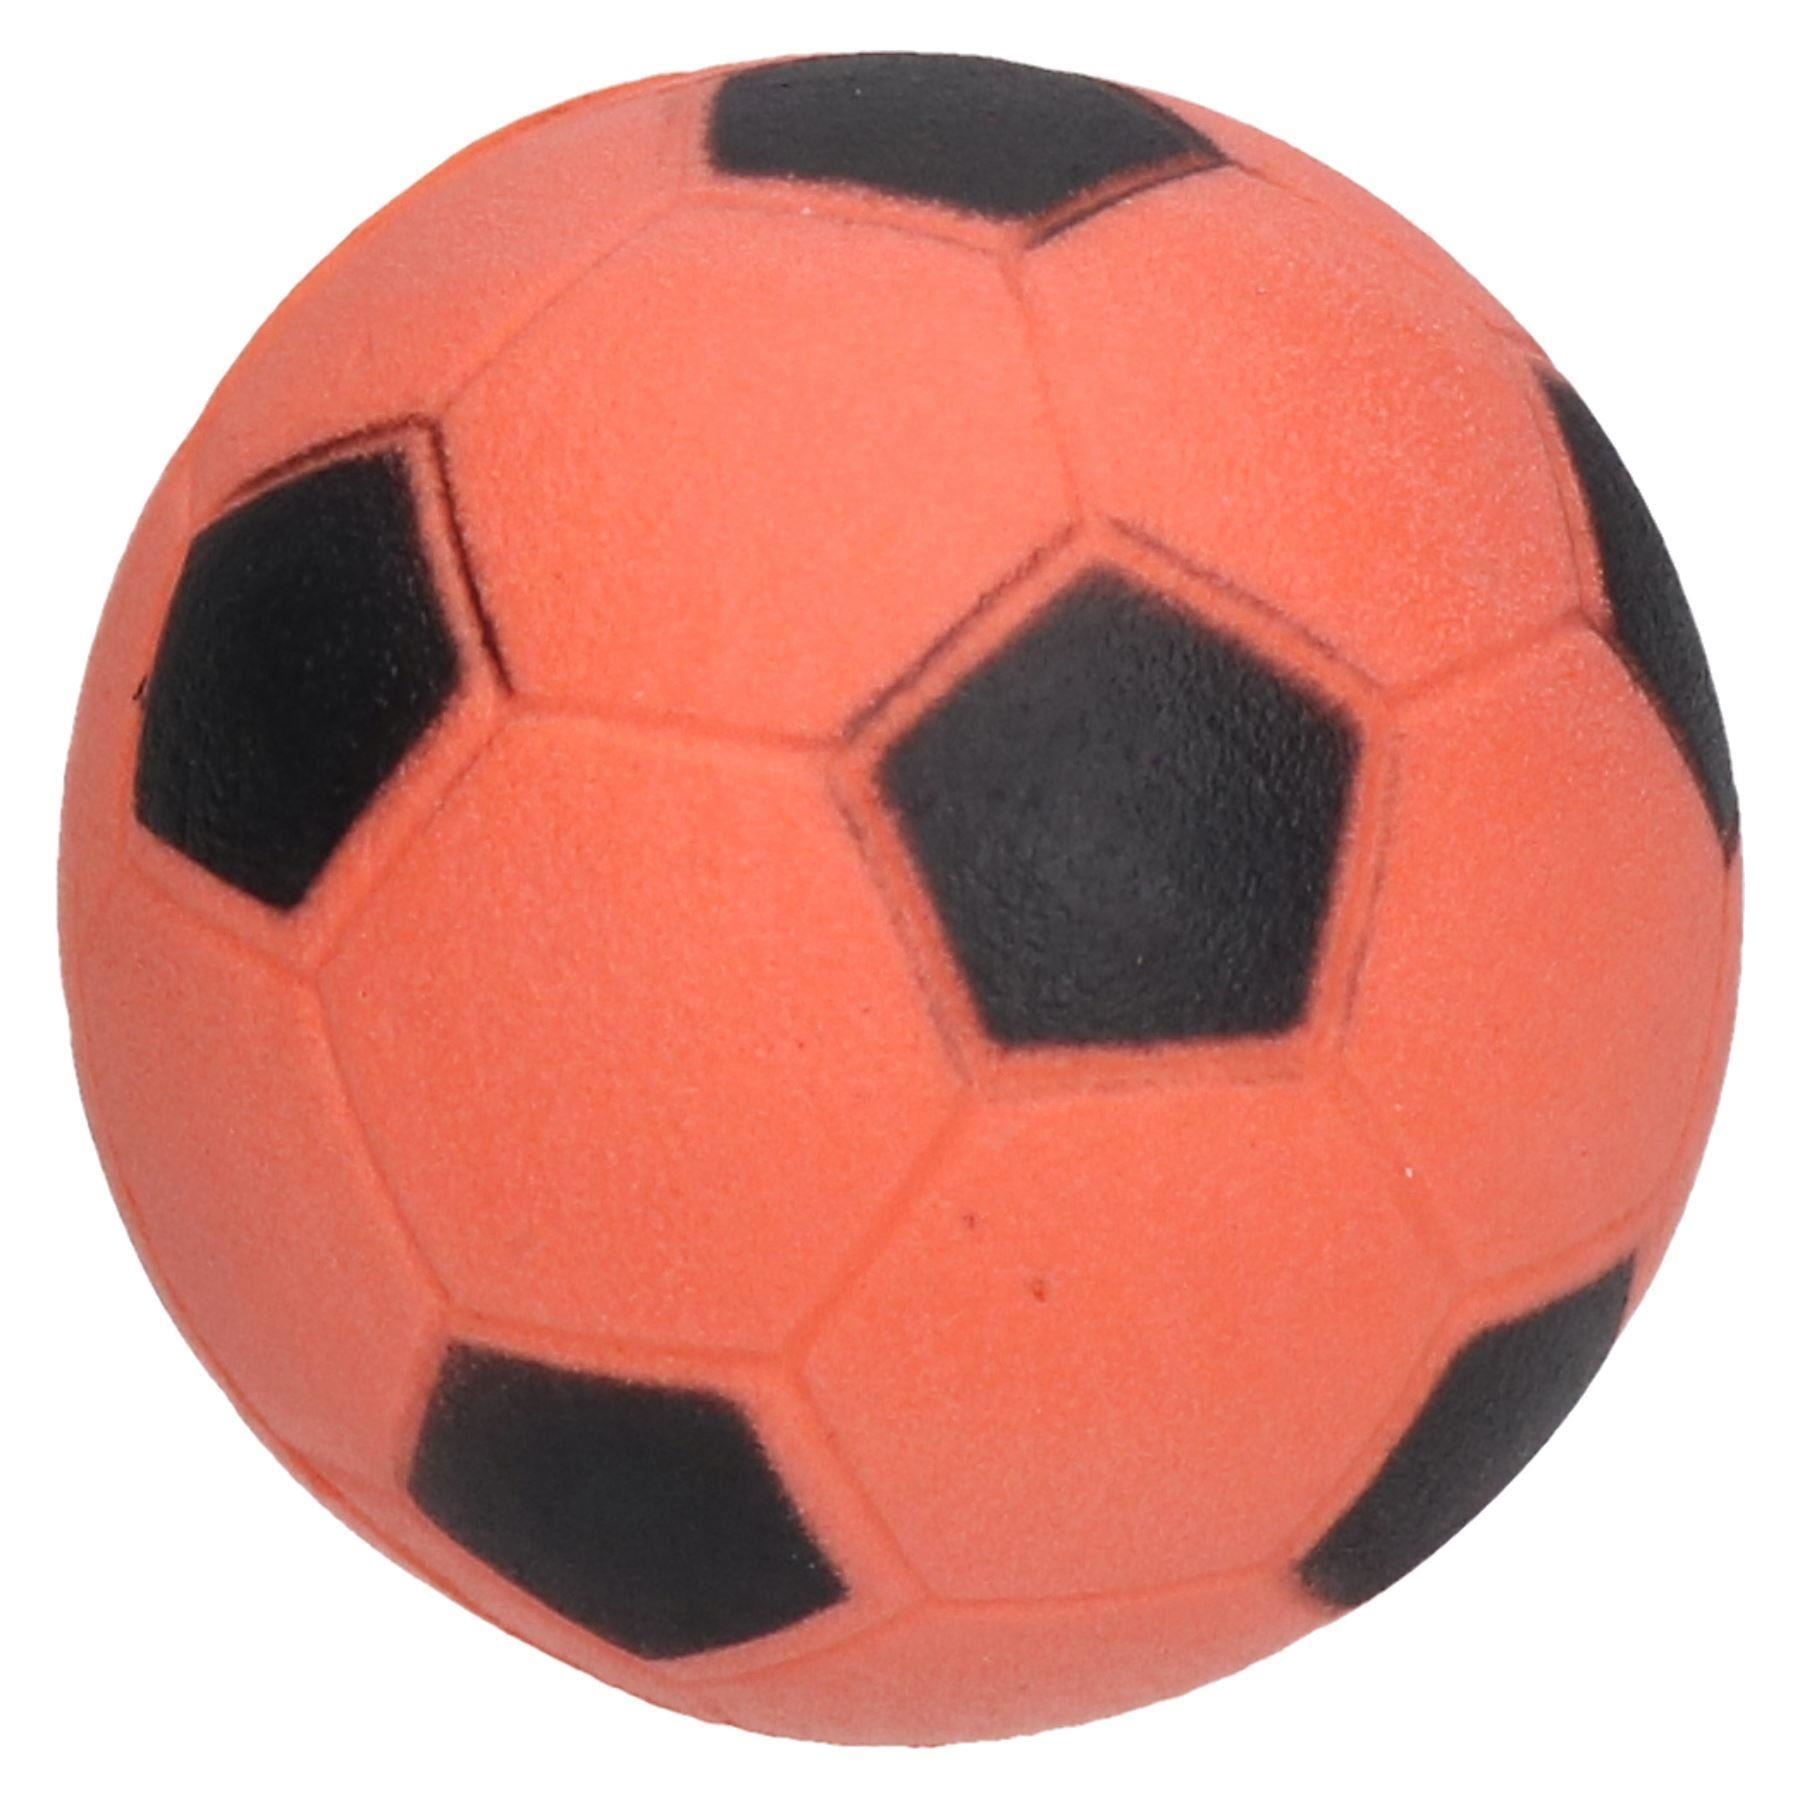 Dog Play Time Rubber Bouncy Sports Balls